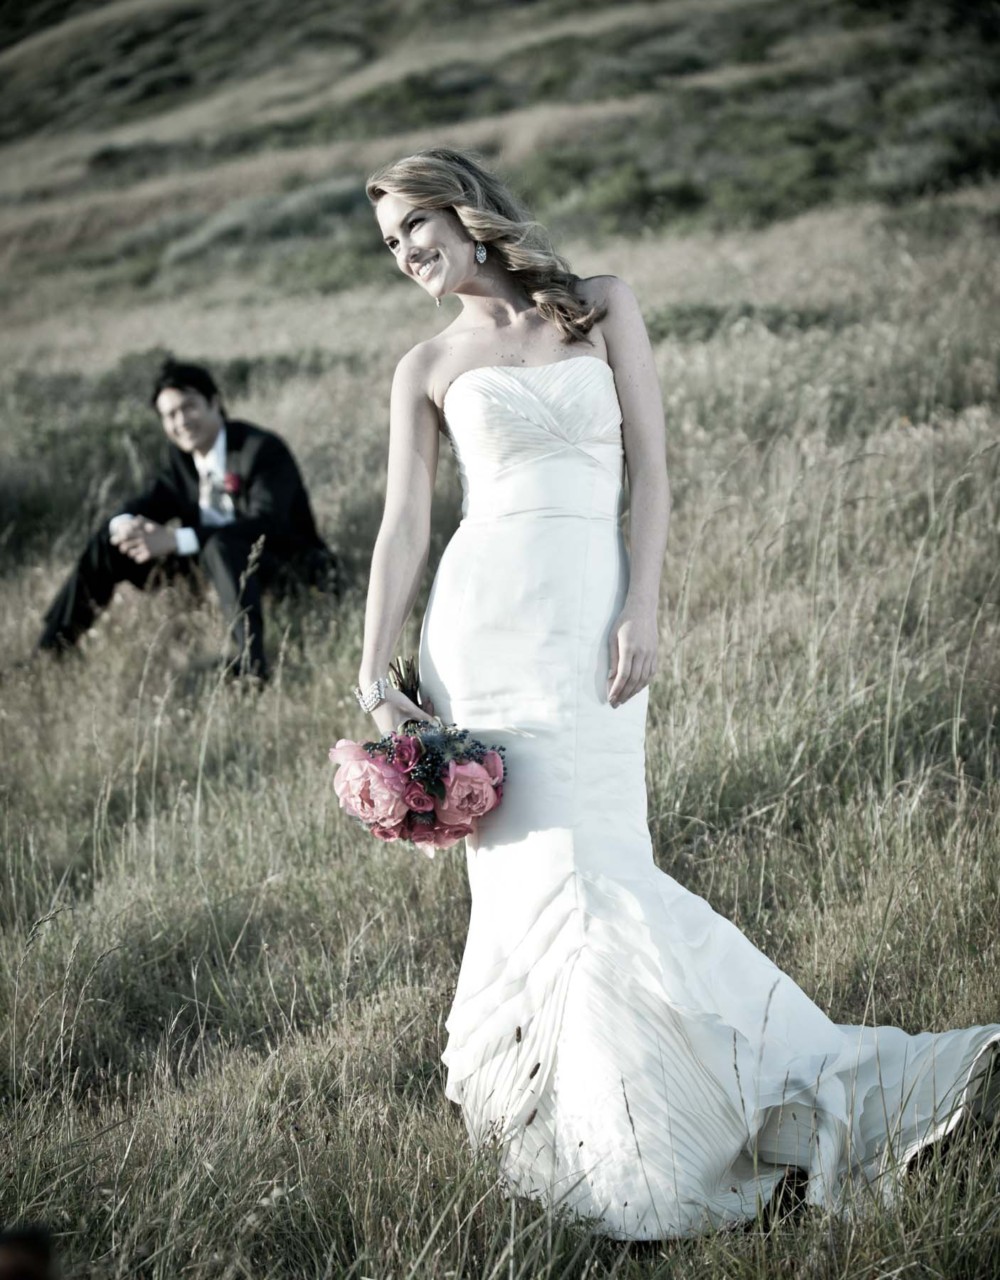 Looking for a summer wedding photographer in Eagle River?